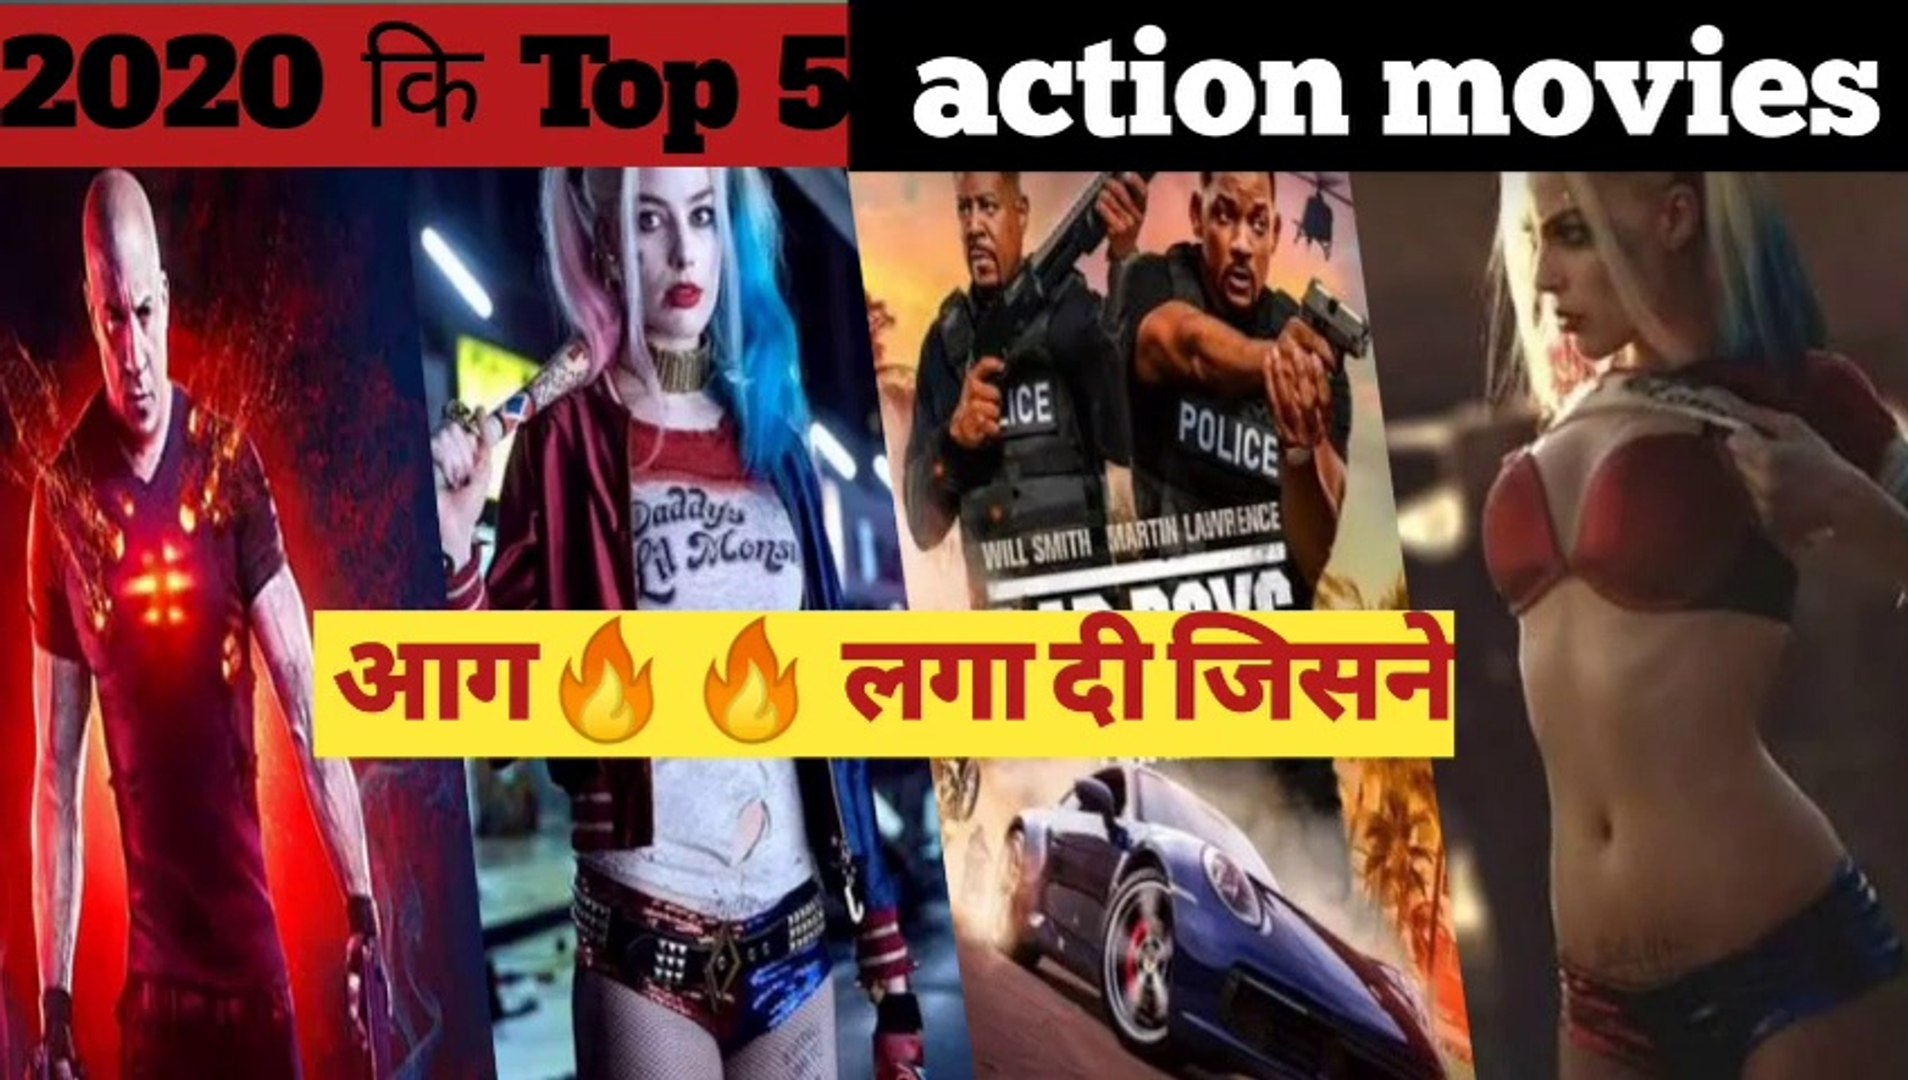 Top5 action movies||top 5 movies released in 2020|| 2020 movies || released in 2020